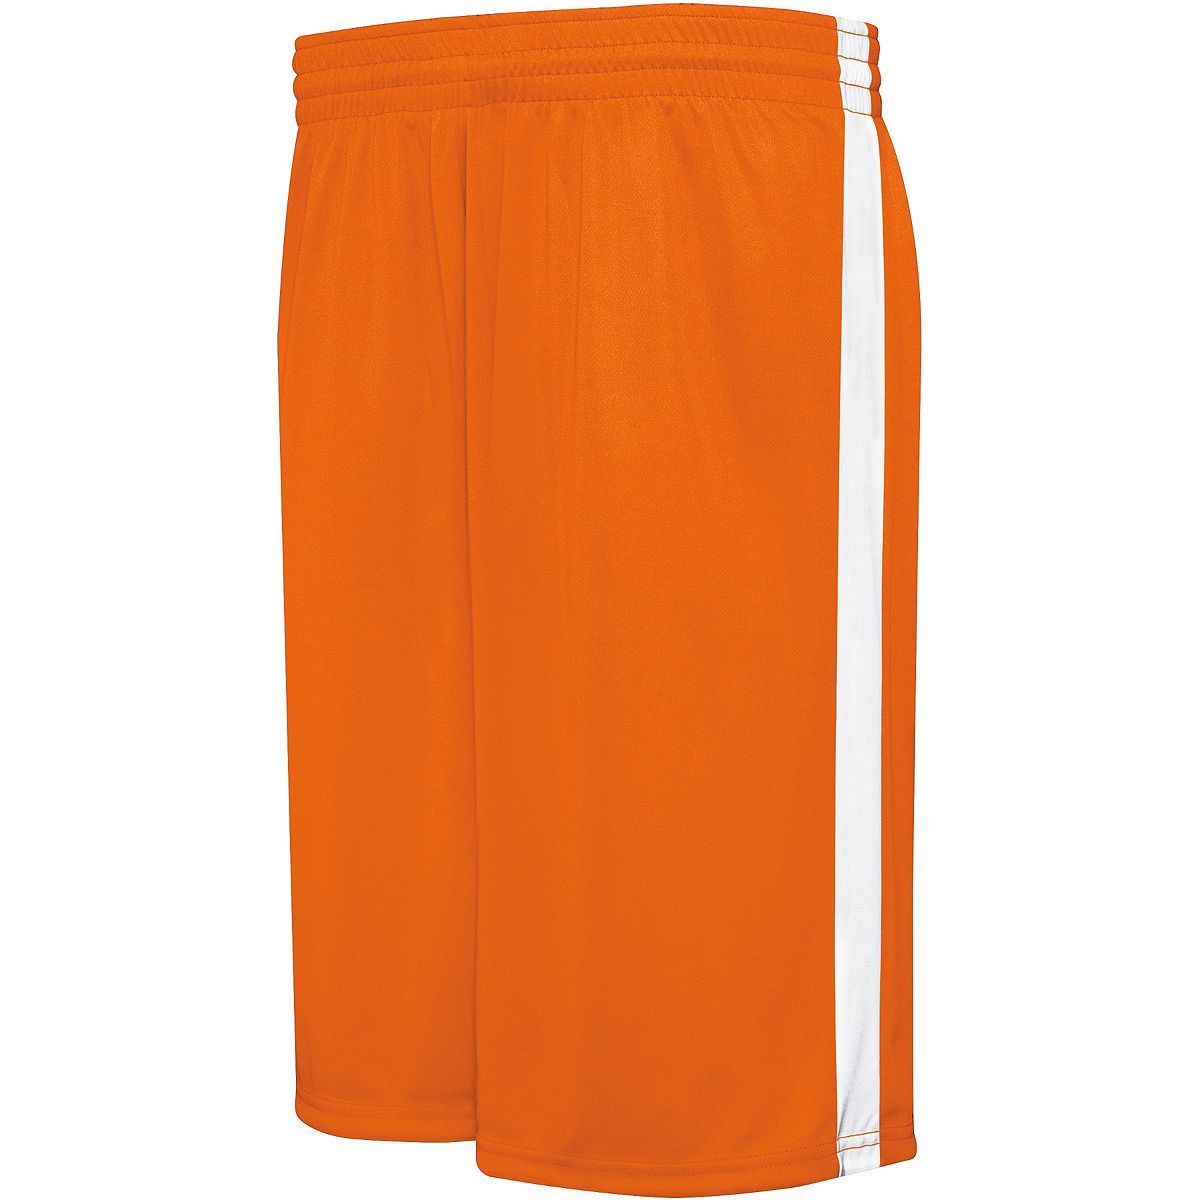 Augusta Sportswear Youth Competition Reversible Shorts in Orange/White  -Part of the Youth, Youth-Shorts, Augusta-Products, Basketball, All-Sports, All-Sports-1 product lines at KanaleyCreations.com